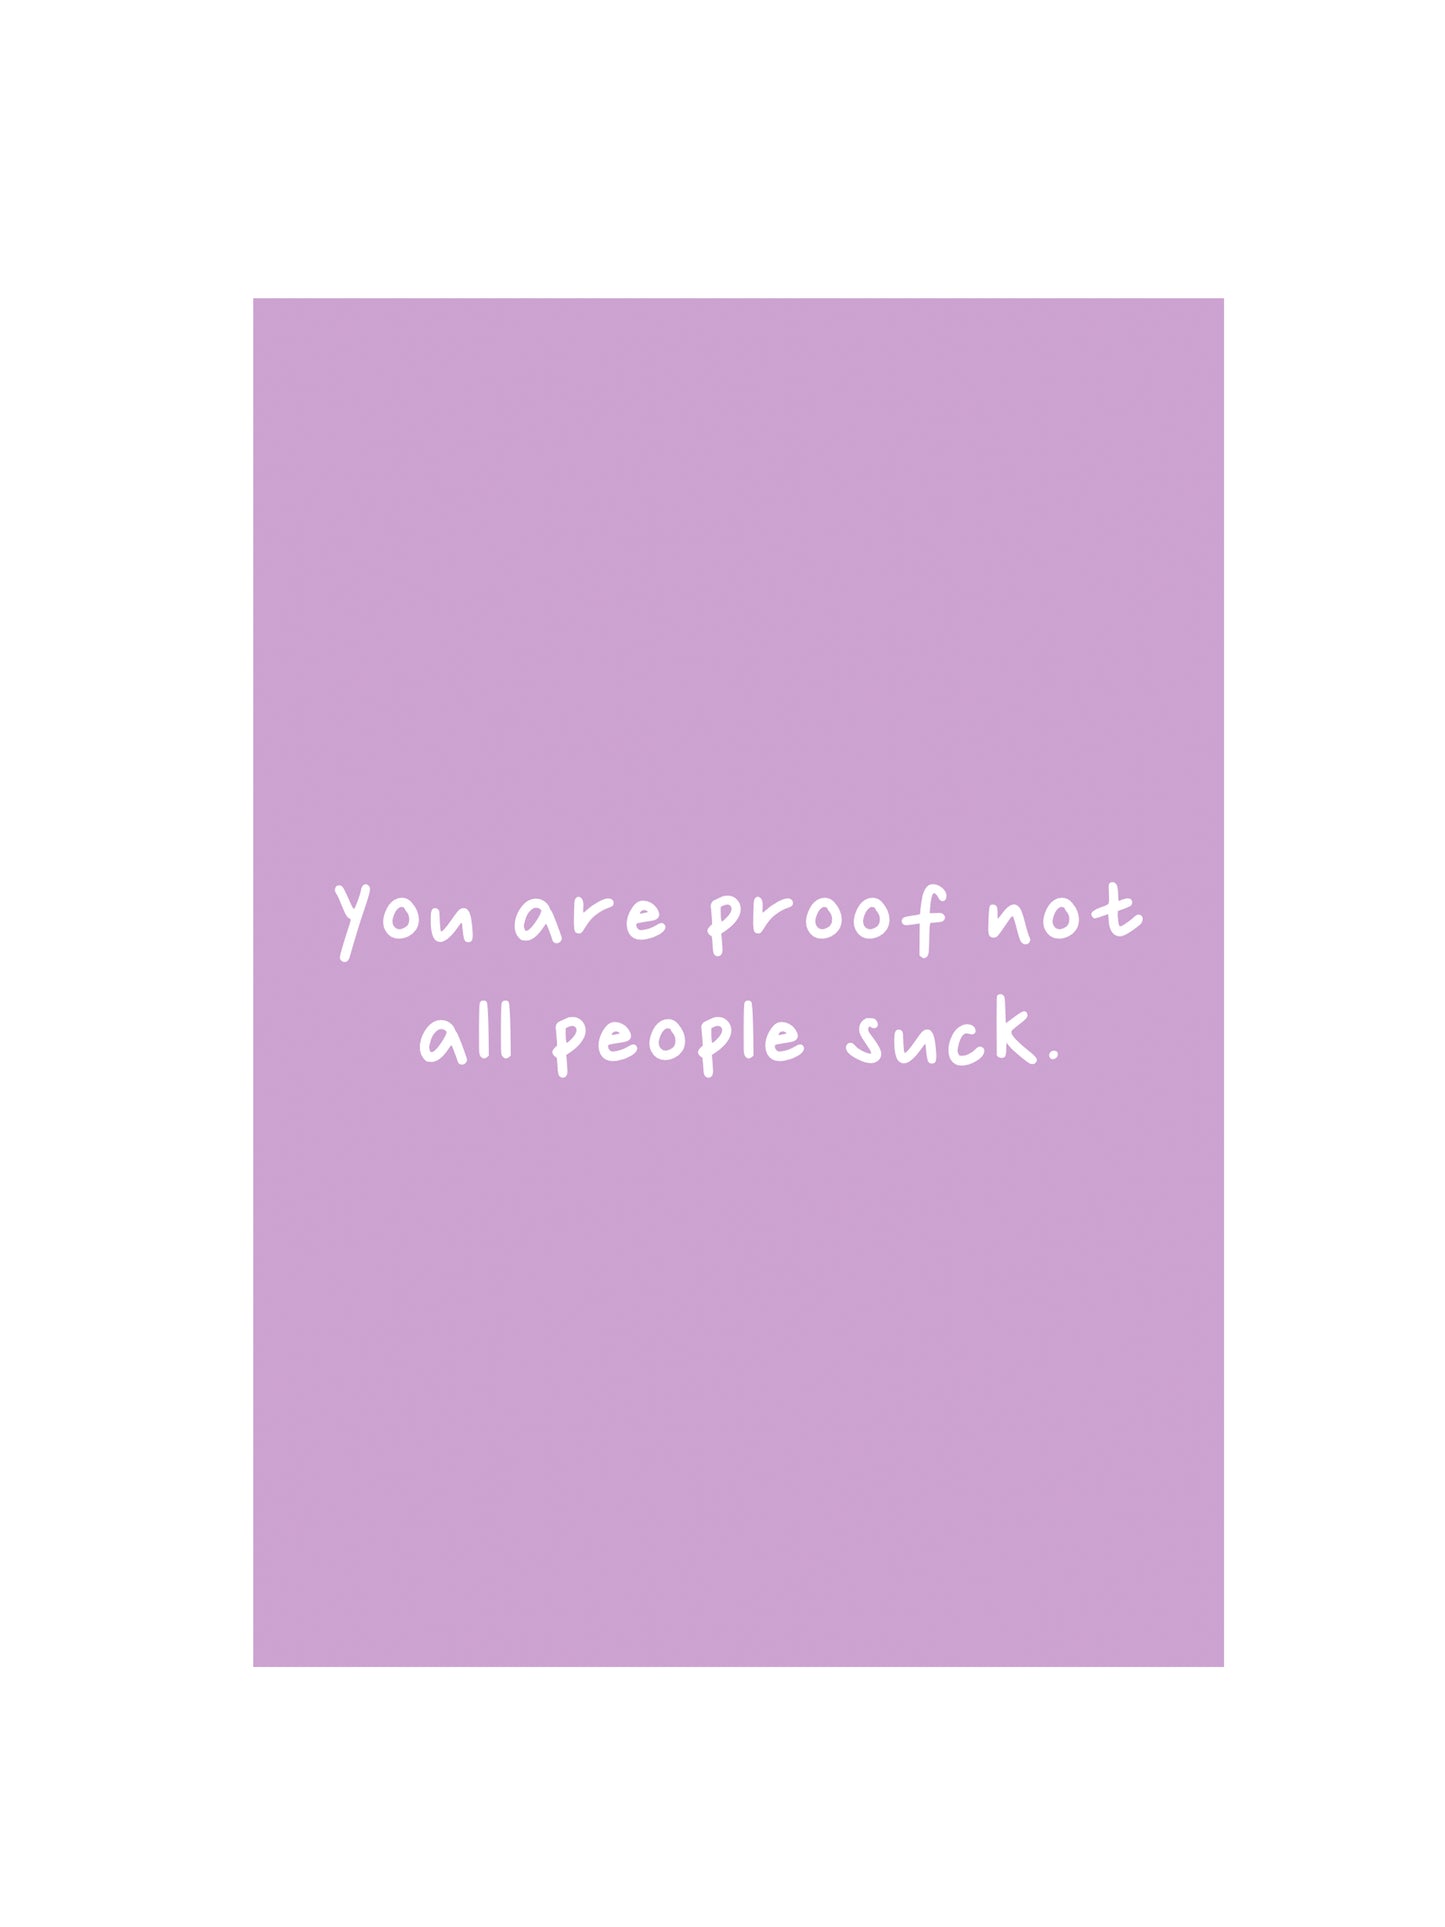 You're Proof Not All People Suck Card